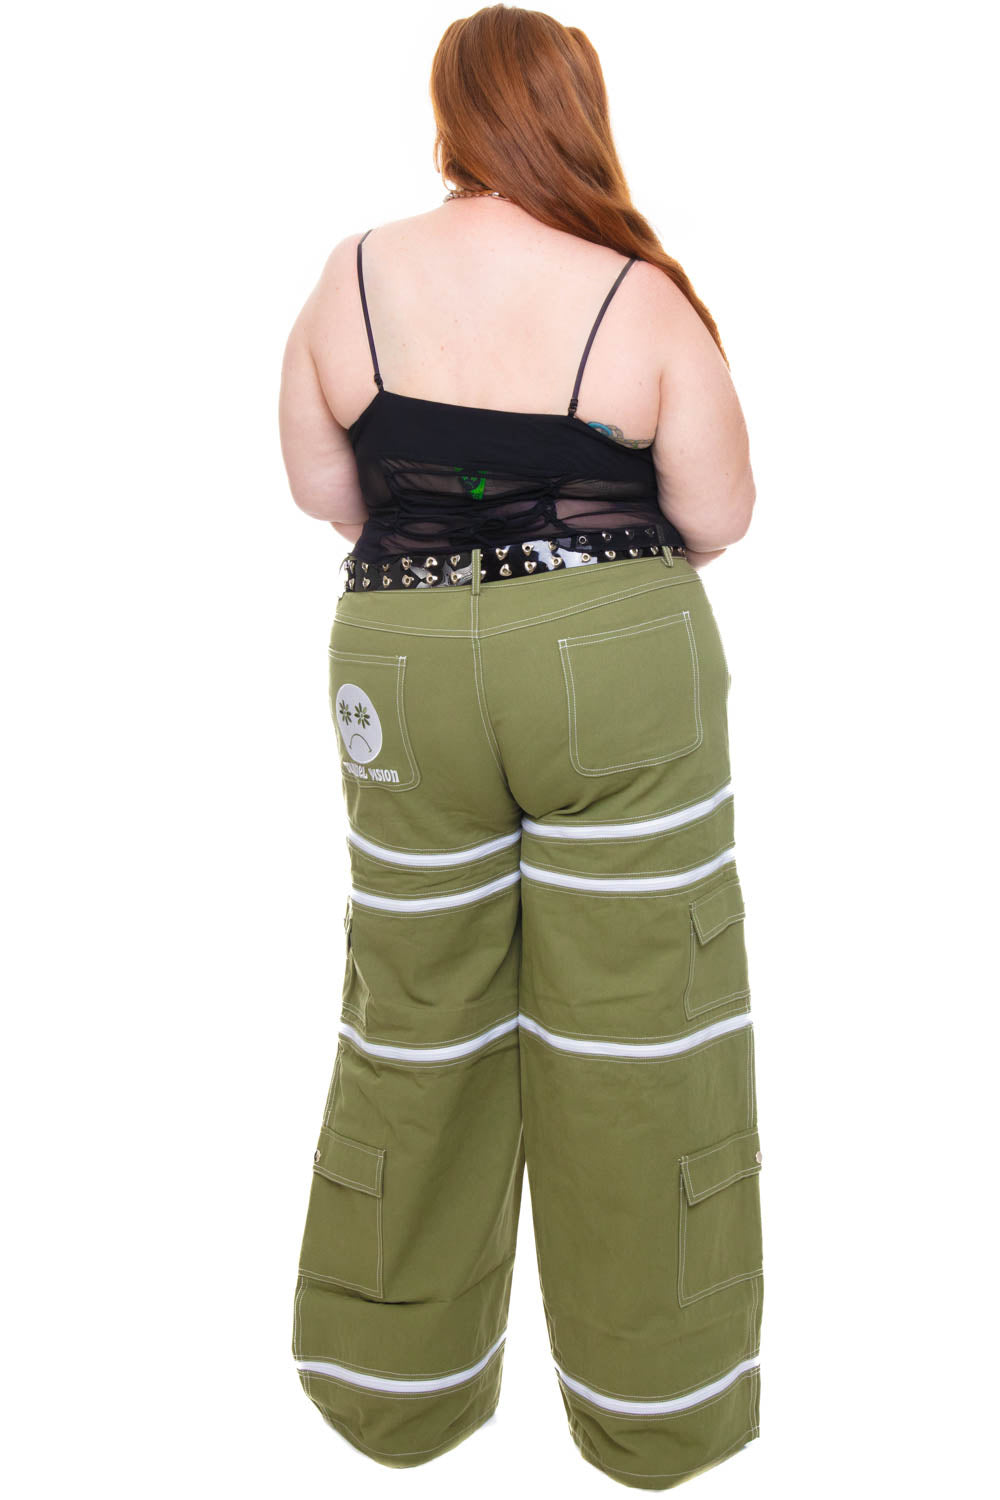 Olive Green 5-in-1 Convertible Zip-Off Cargo Pants – Tunnel Vision | Shorts